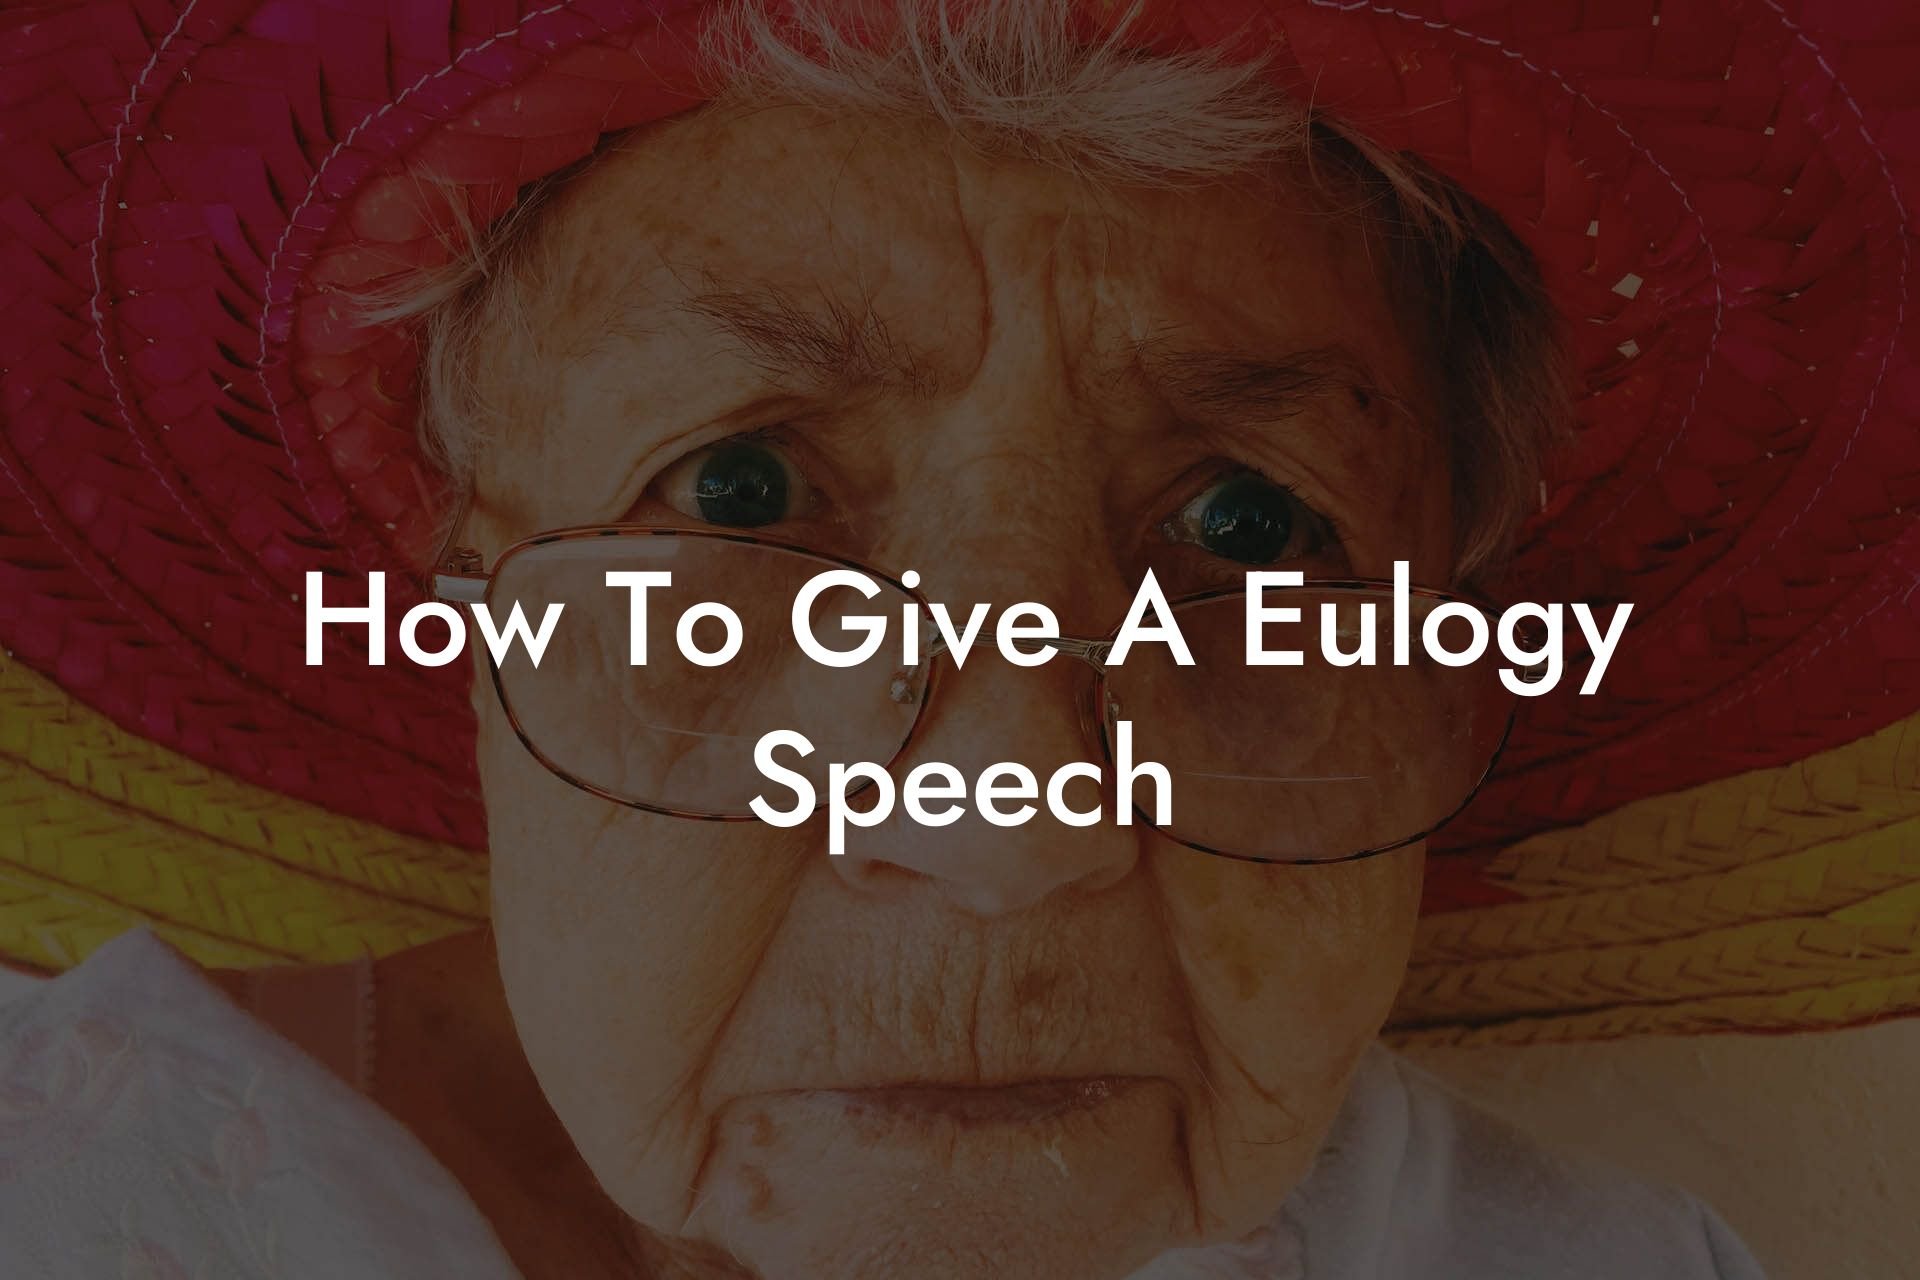 How To Give A Eulogy Speech